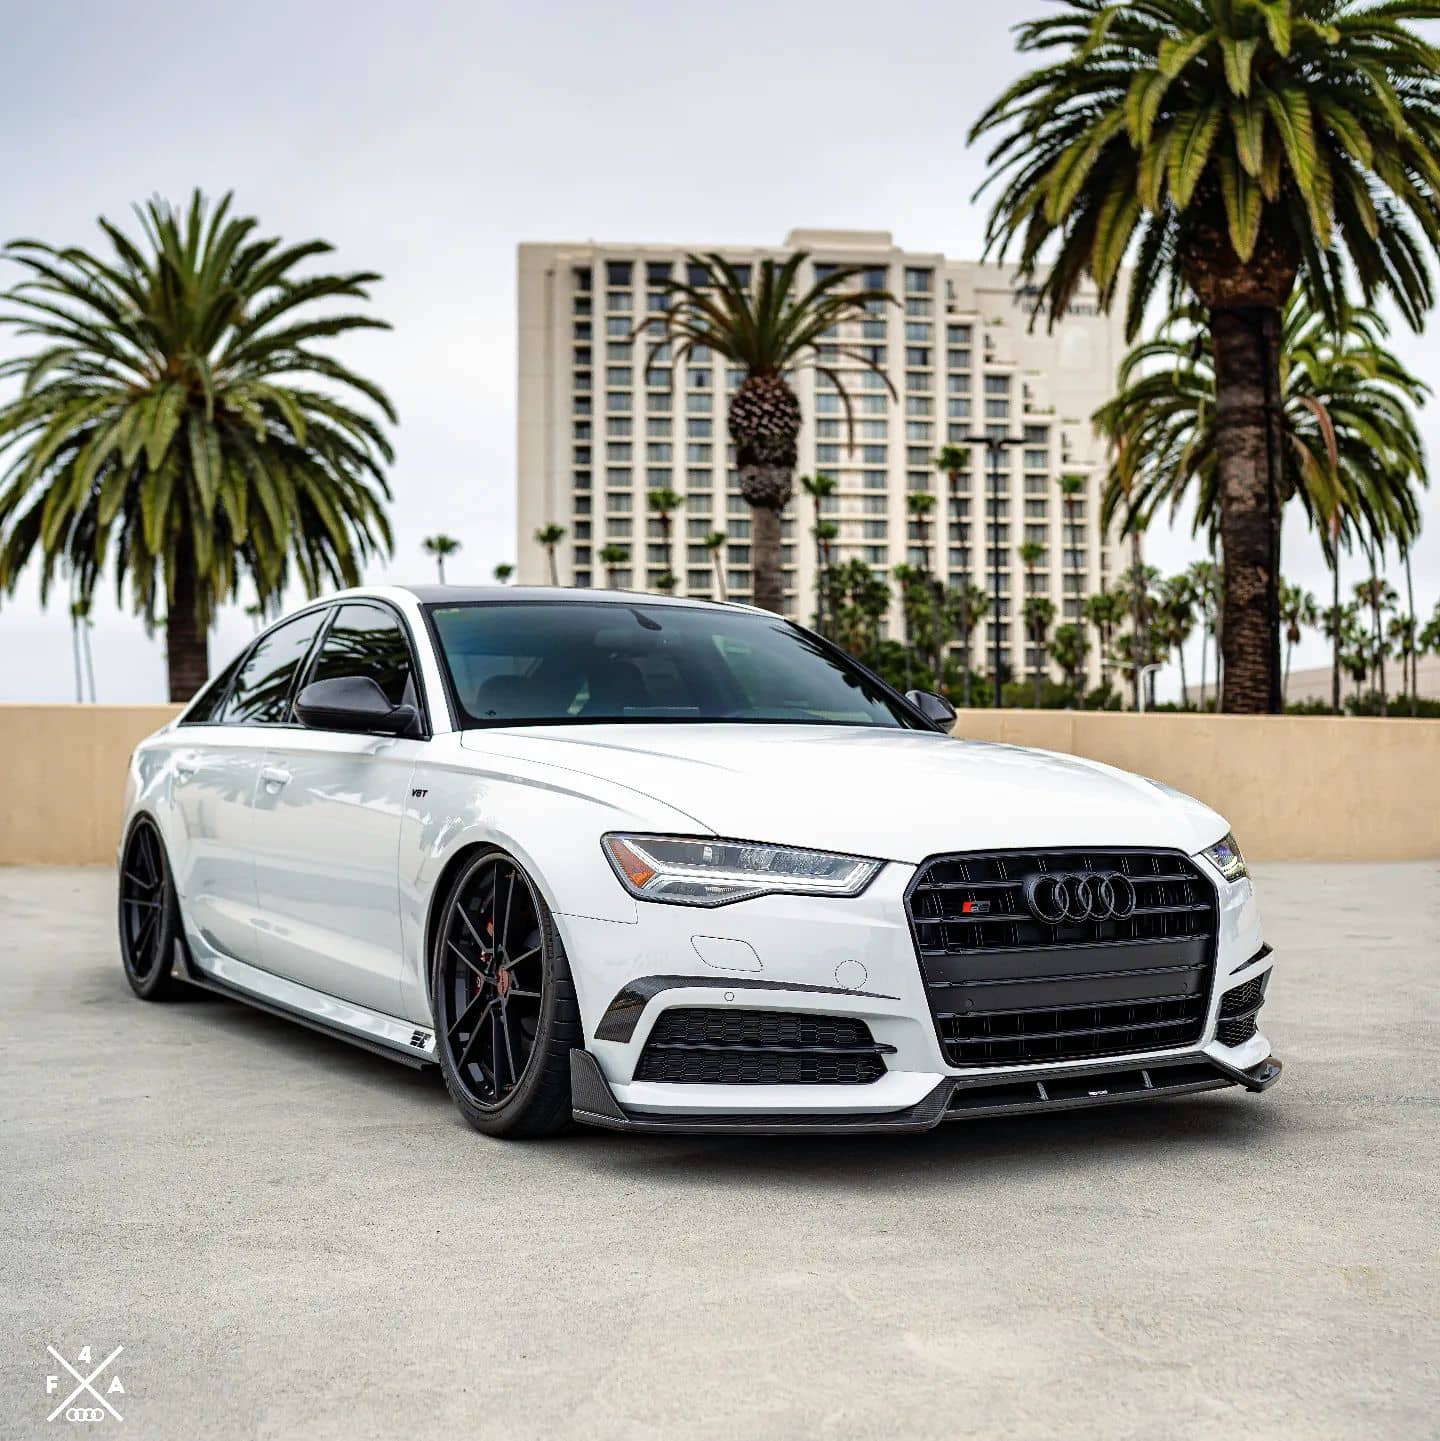 White Audi S6 with blacked out grille and Karbel Carbon Fiber front splitter